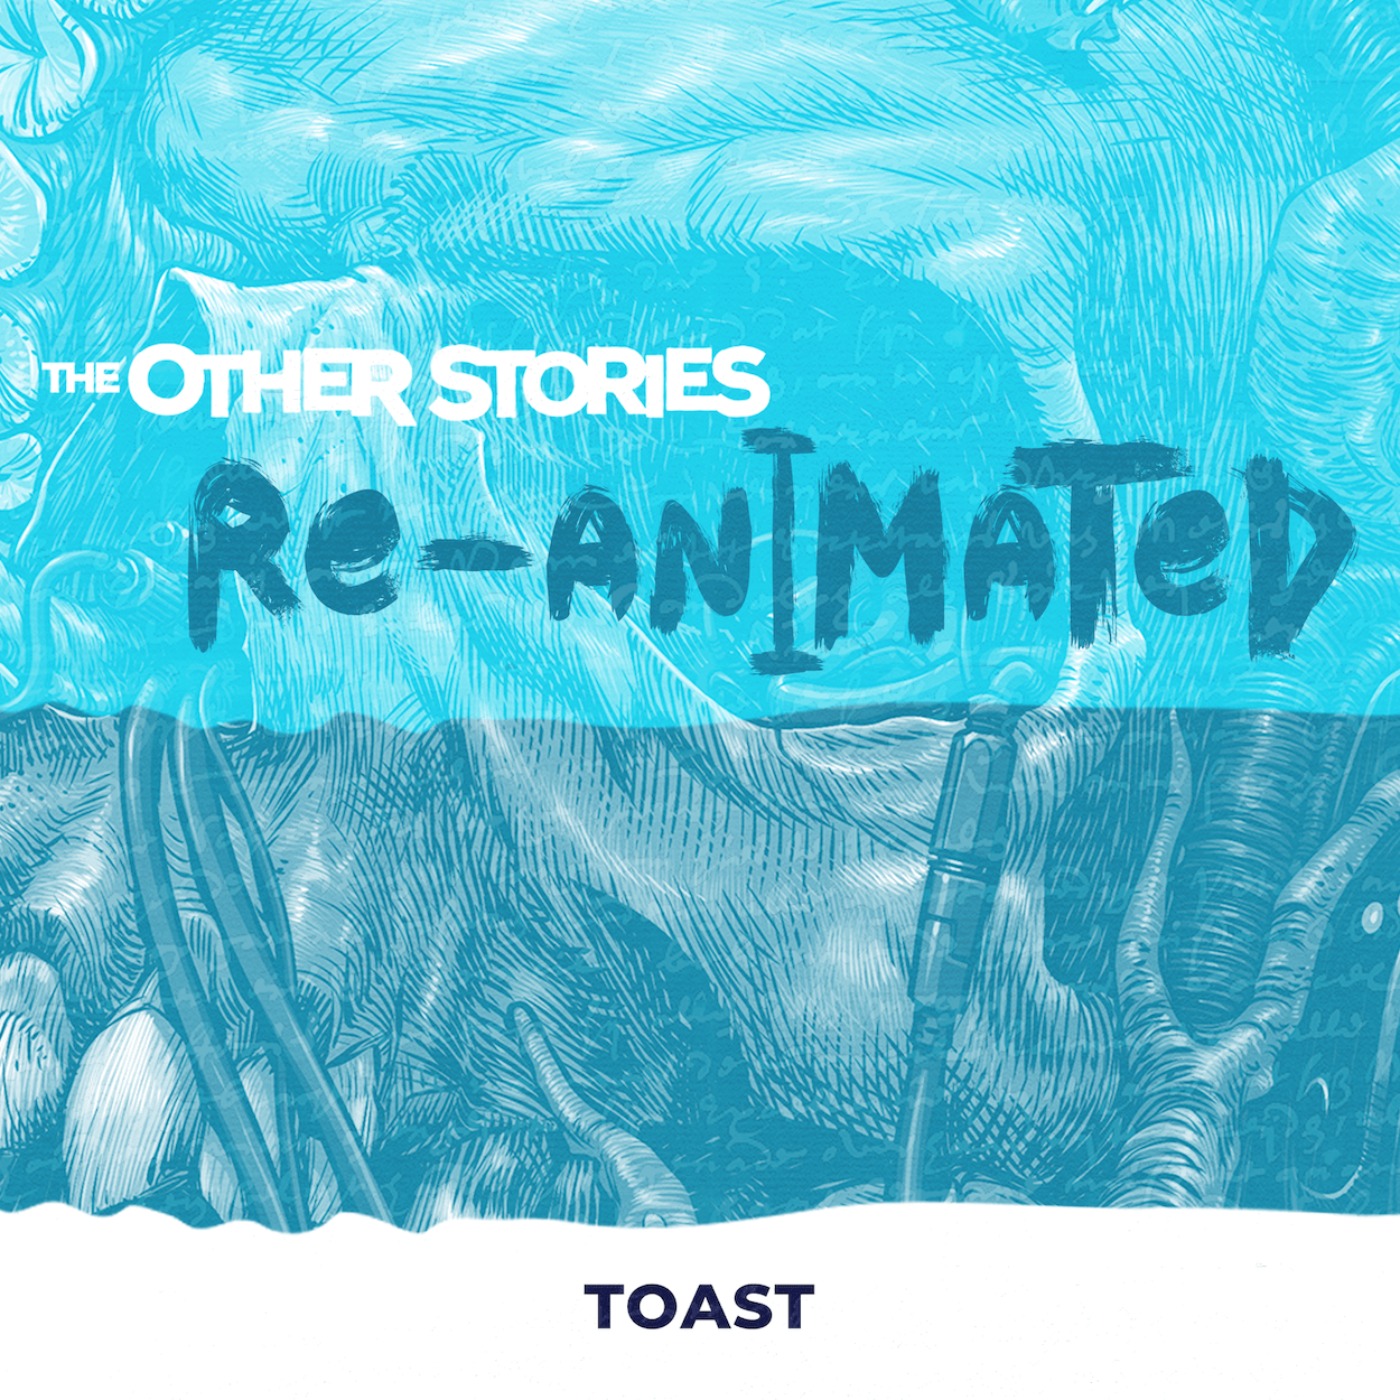 The Other Stories Re-Animated - TOAST